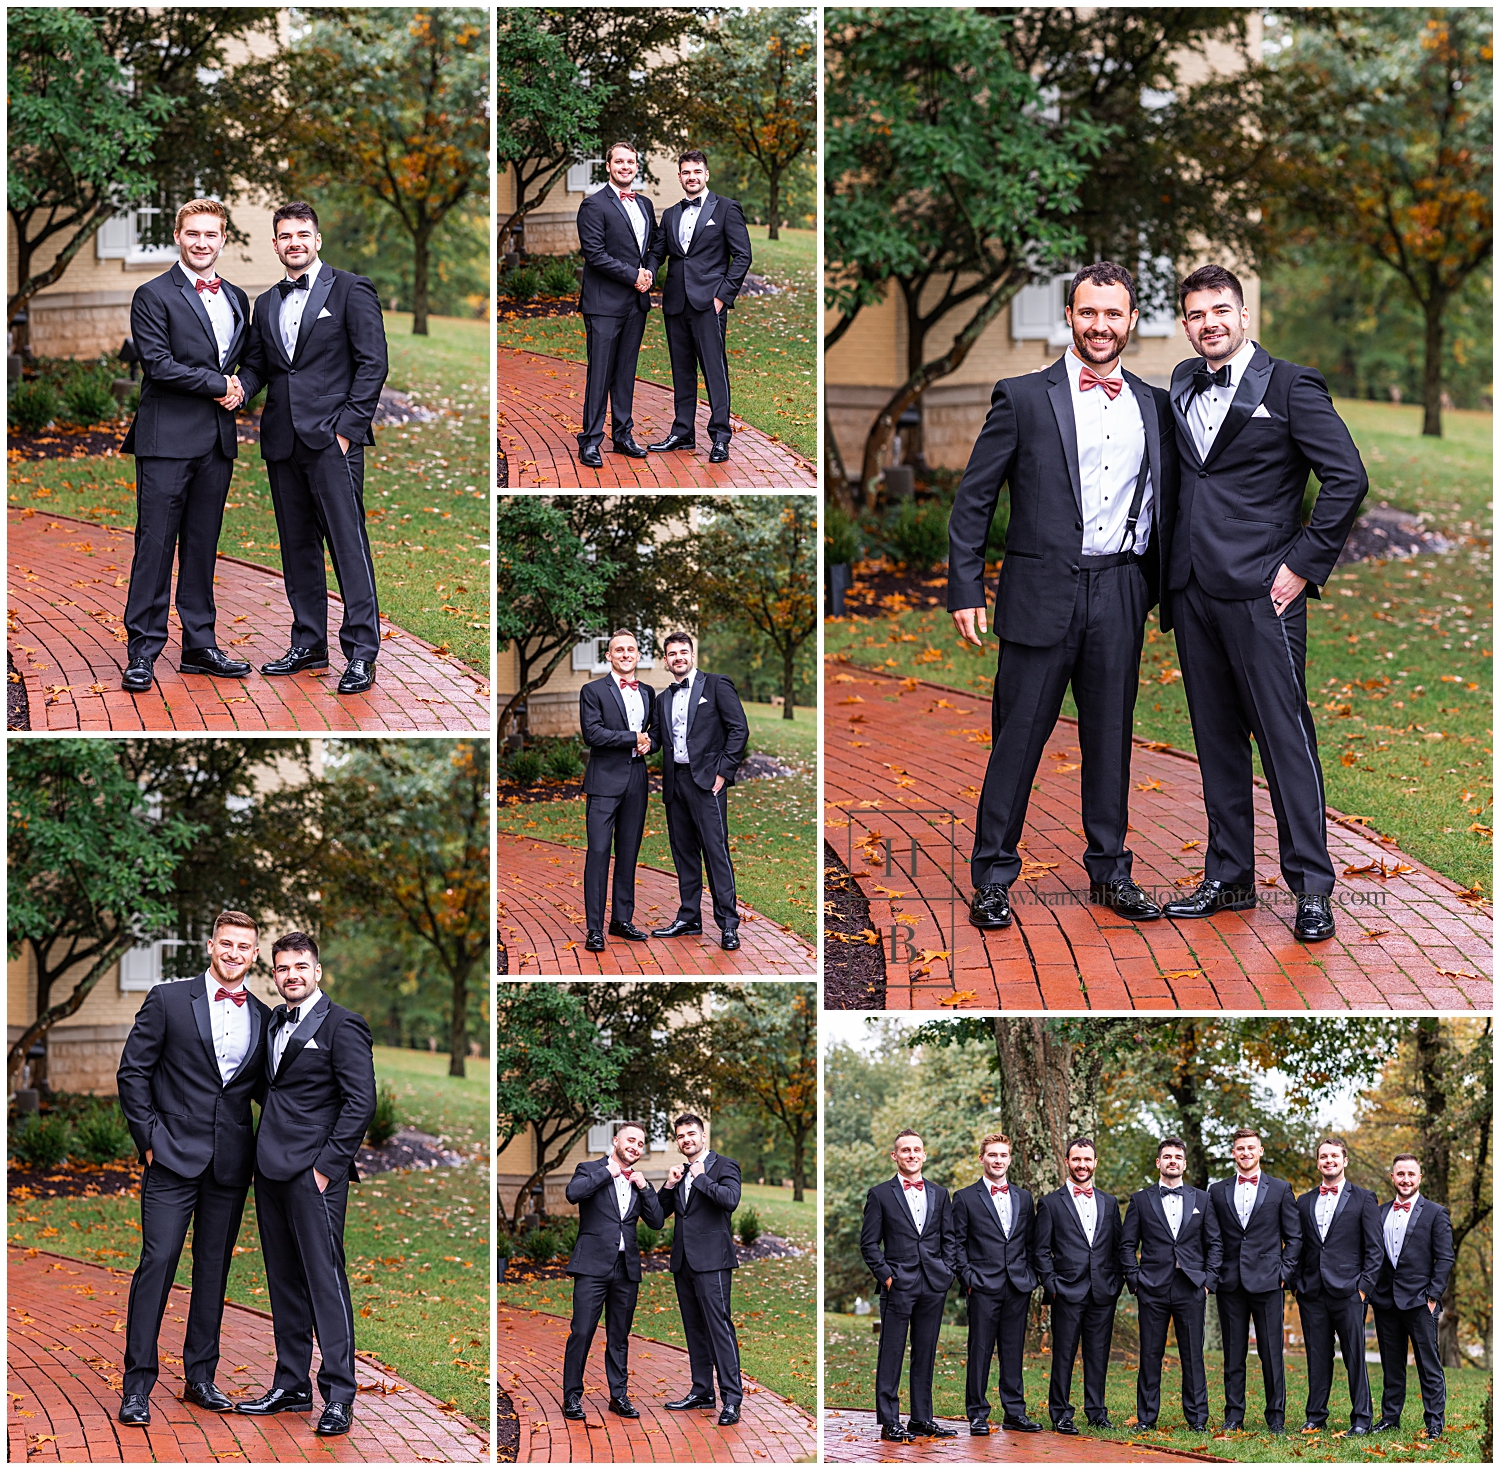 Groom and groomsmen pose together for individual wedding photos.